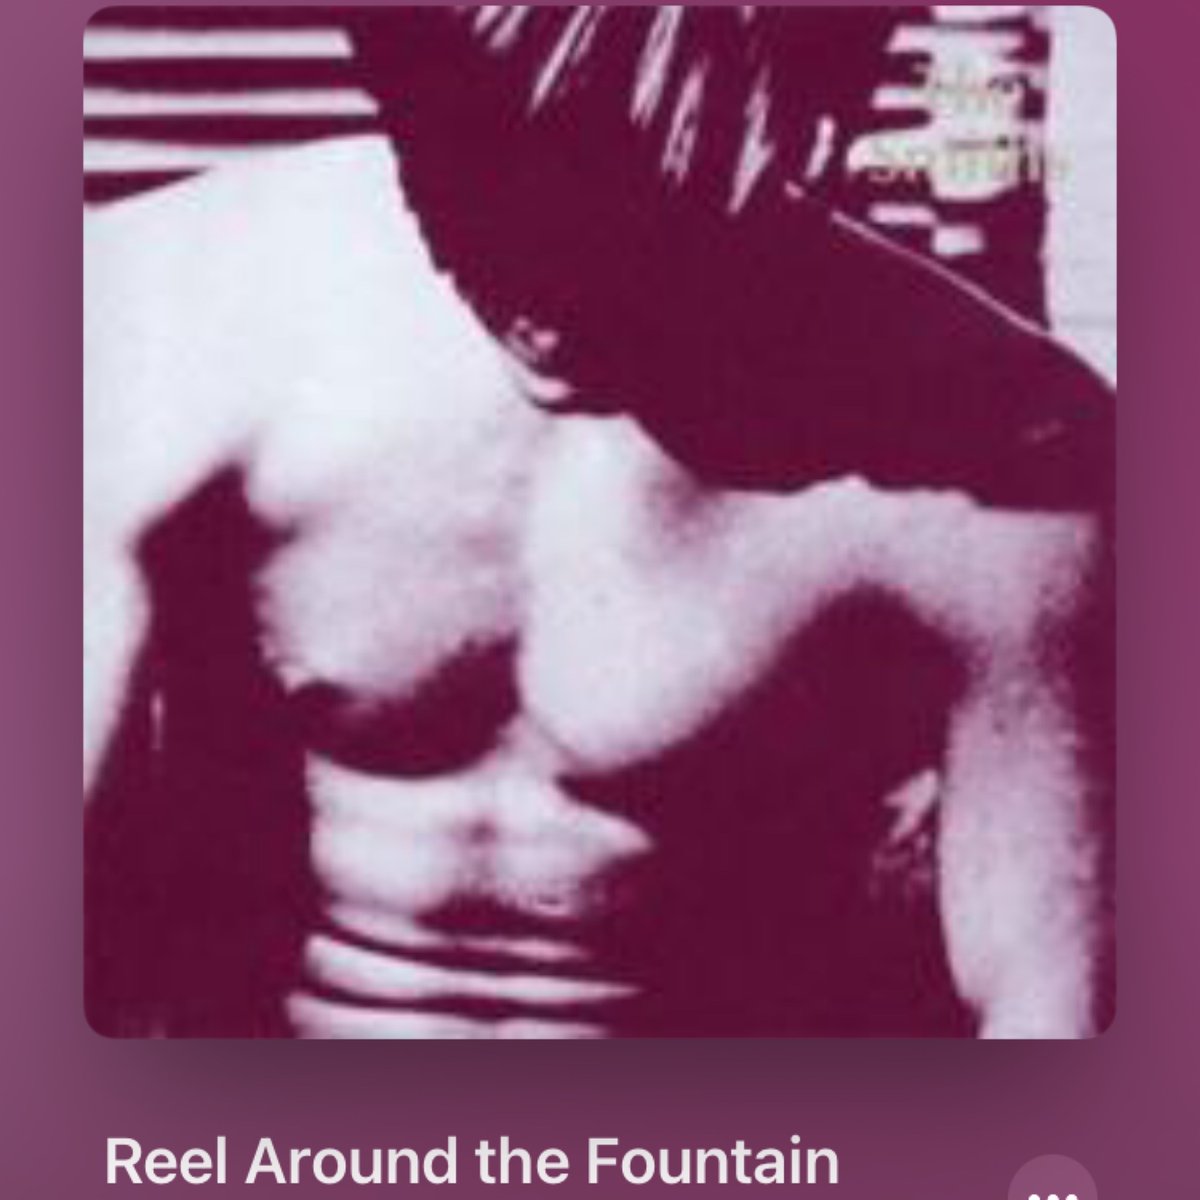 #Nowplaying Reel Around the Fountain - The Smiths with Paul Carrack (The Smiths) #AndyRourke #ギタポ #ネオアコ #半裸ジャケ #PaulCarrack youtube.com/results?q=Reel…